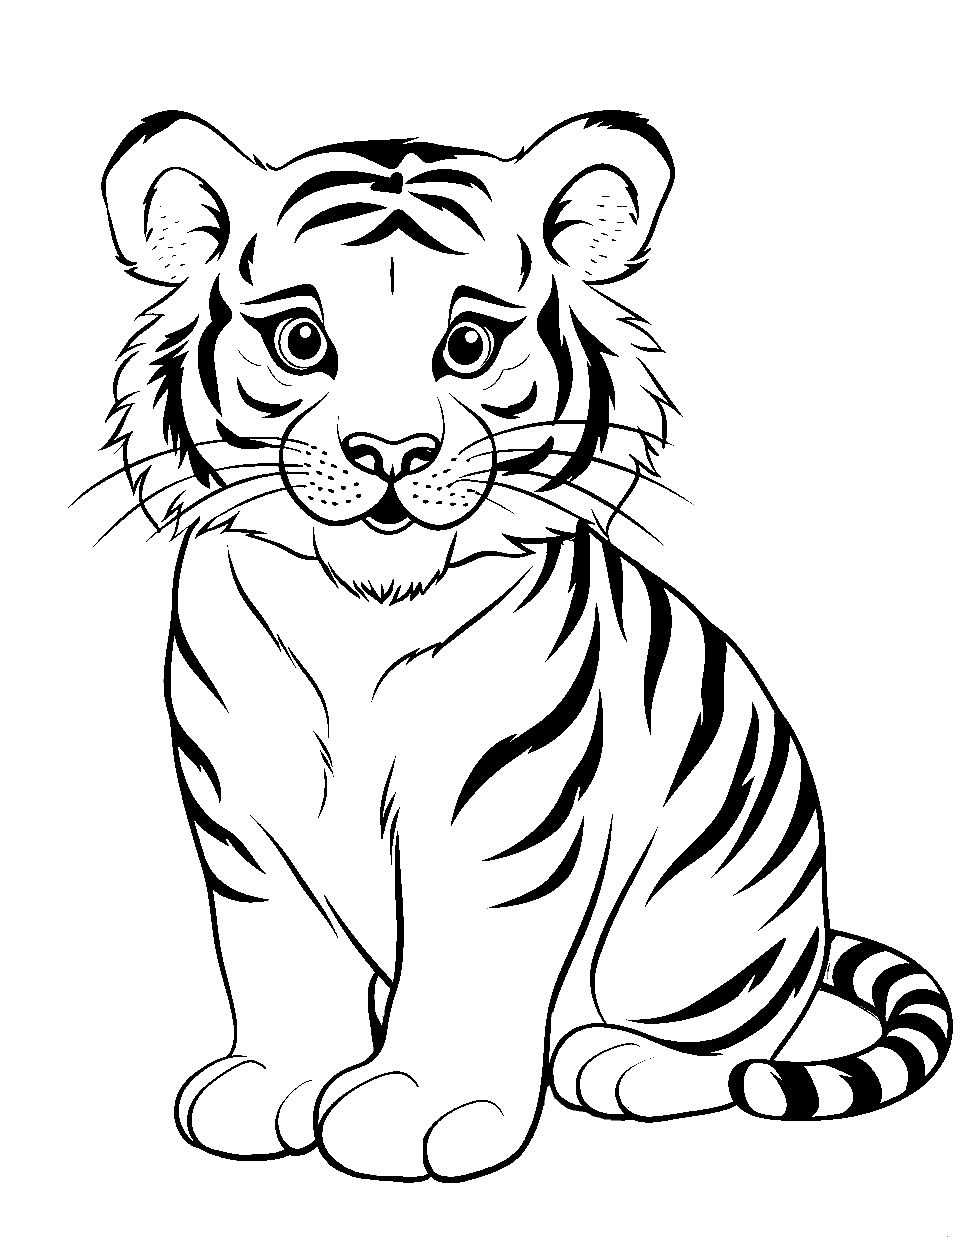 Cute Baby Tiger Coloring Page - A cartoon-style, cute small baby tiger sitting.